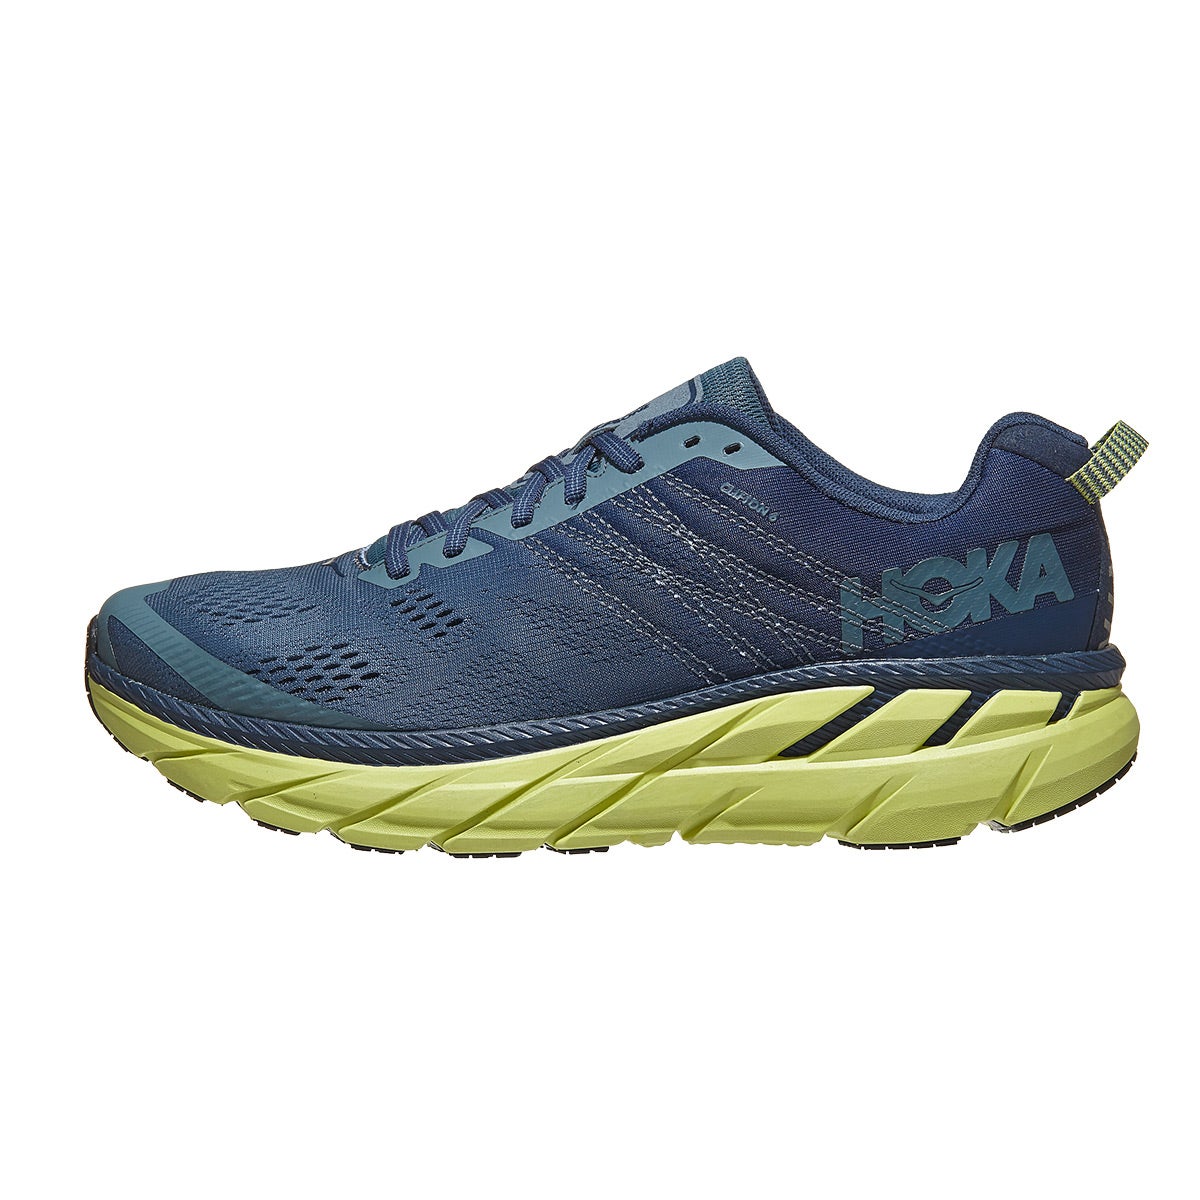 HOKA ONE ONE Clifton 6 Men's Shoes Stormy Weather/Oc 360° View ...